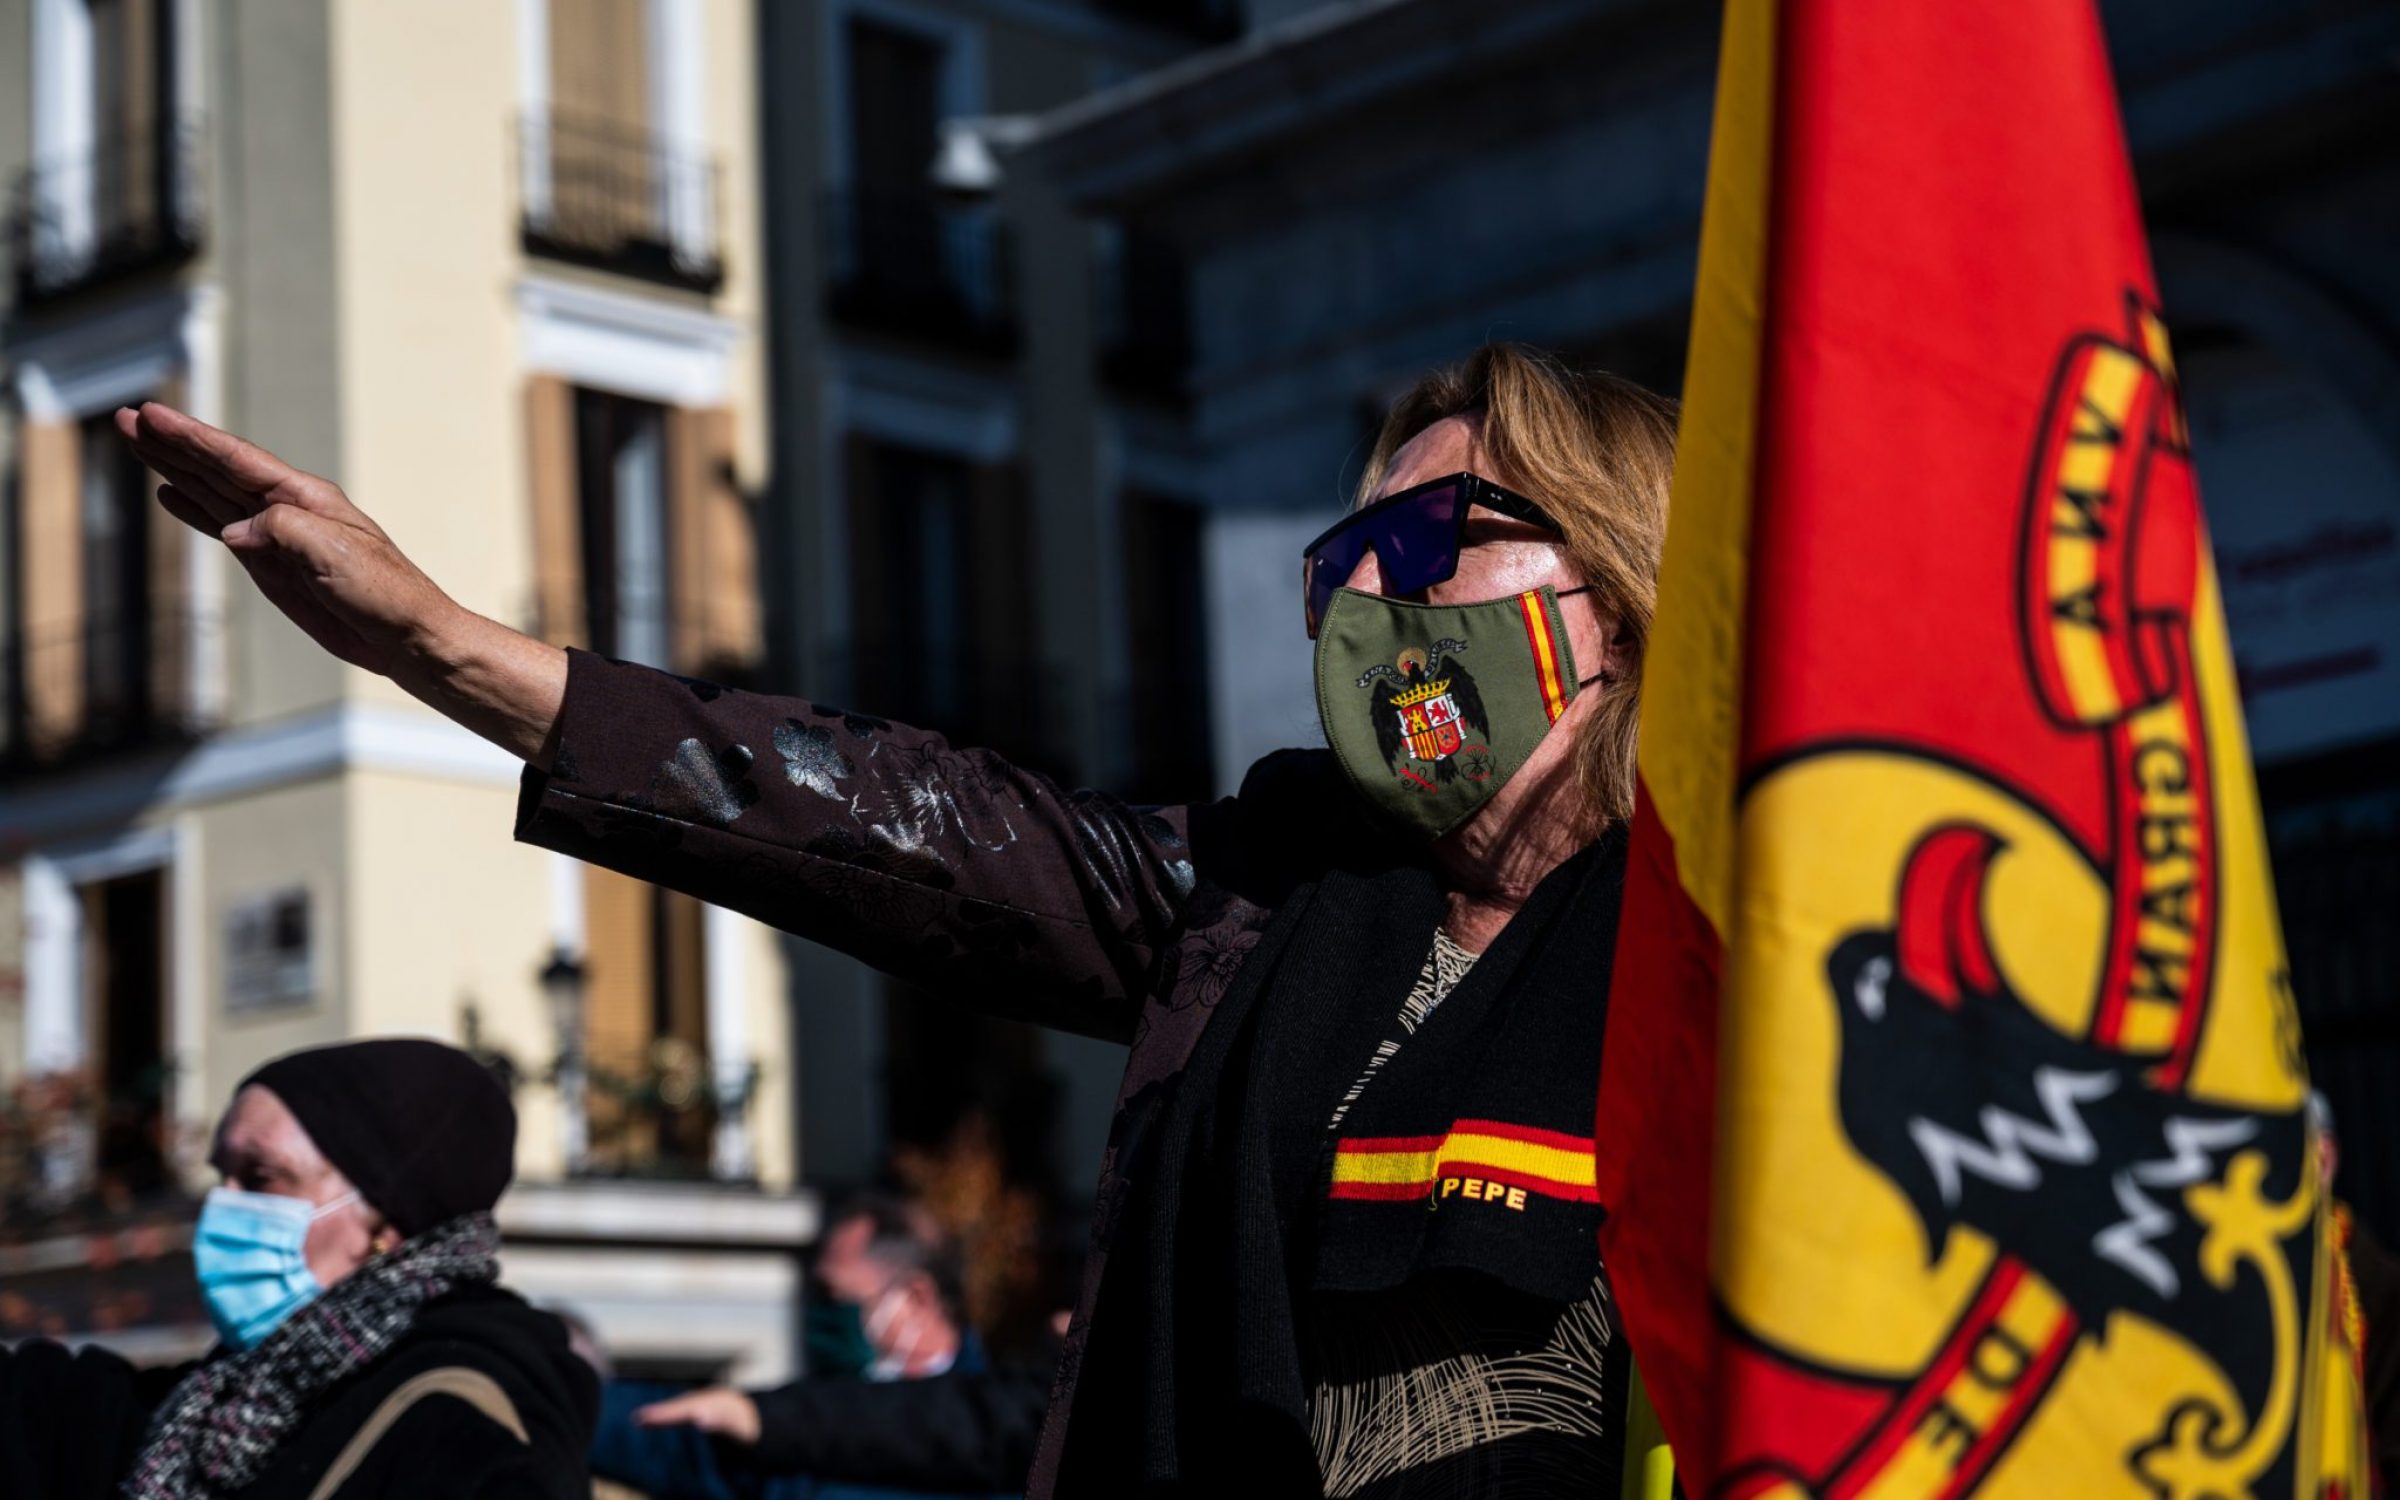 A far right wing supporter of Franco wearing a mask with the pre-constitutional symbol raising her hand making a fascist salute and holding a pre-constitutional flag during a rally to commemorate the 45th anniversary of the death of Spanish former dictator Francisco Franco at Plaza de Oriente. Franco’s forces triumphed in the Spanish Civil war of 1936-1939.